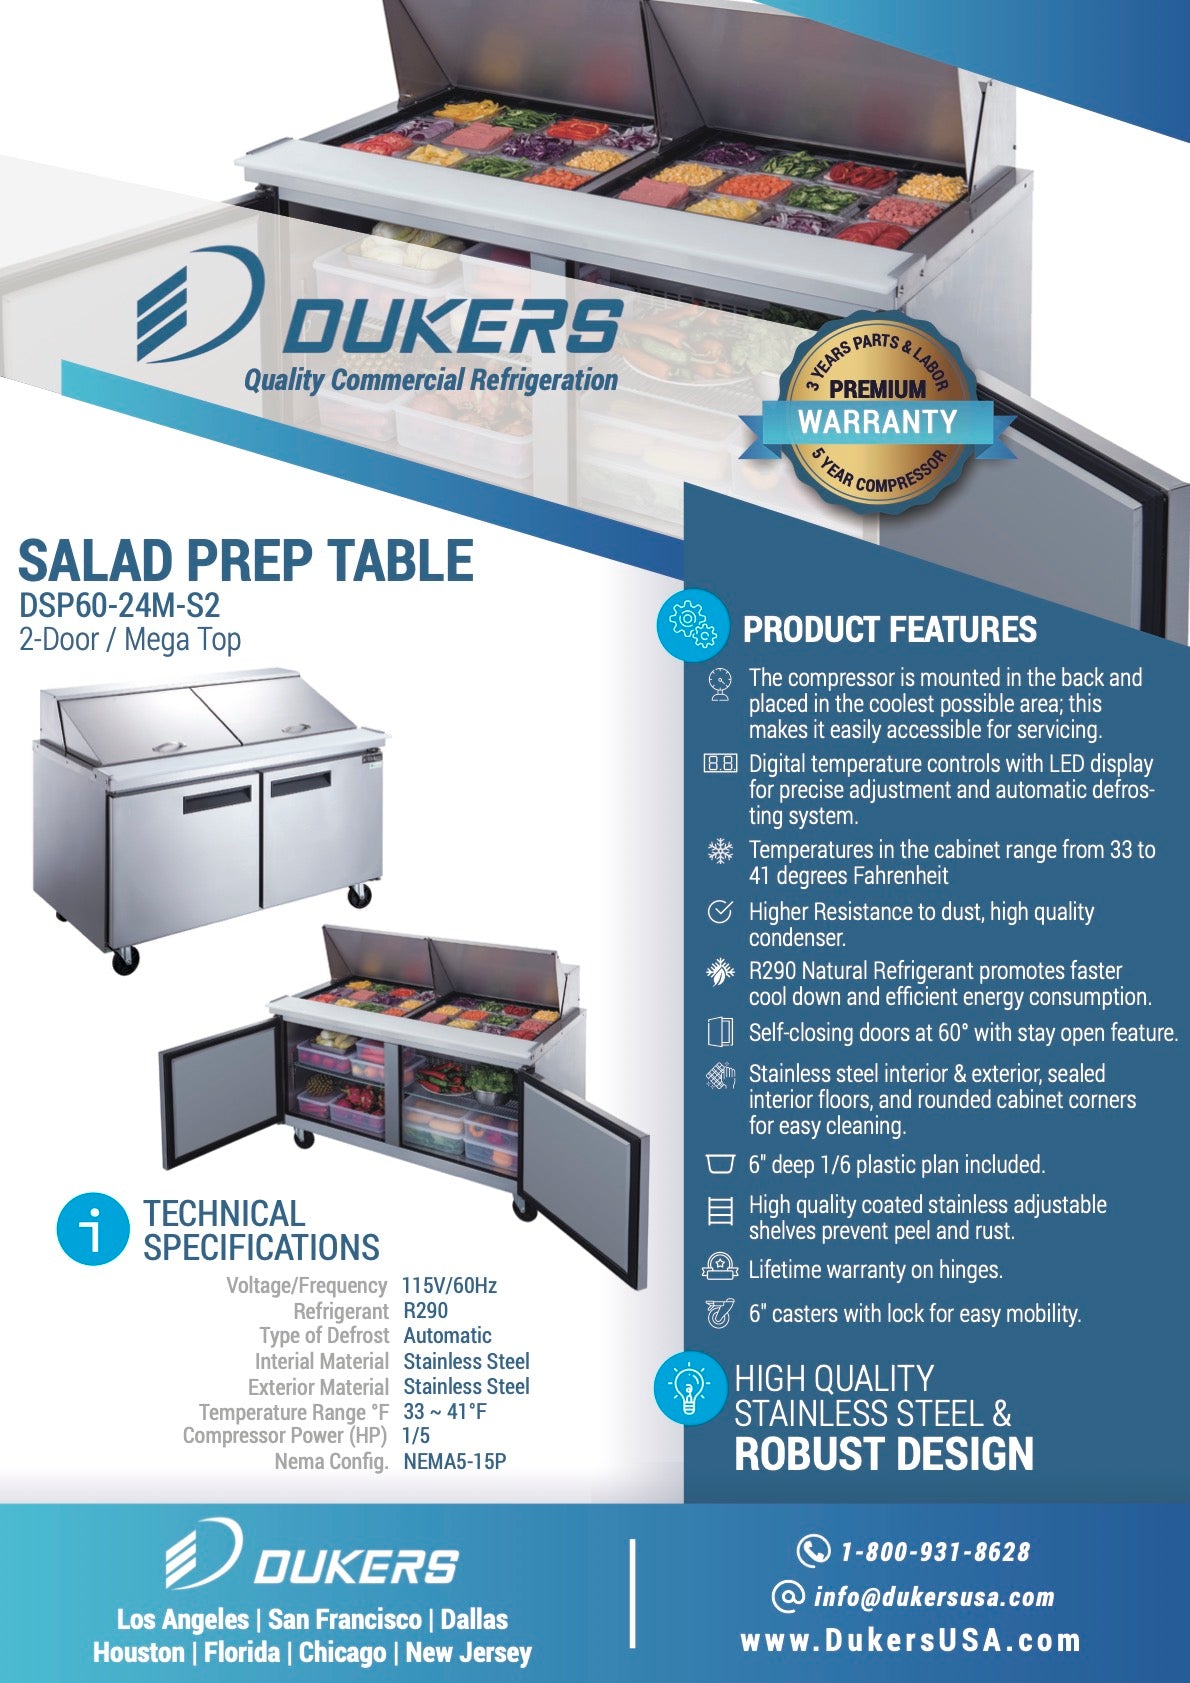 Dukers DSP60-24M-S2 2-Door Commercial Food Prep Table Refrigerator in Stainless Steel with Mega Top